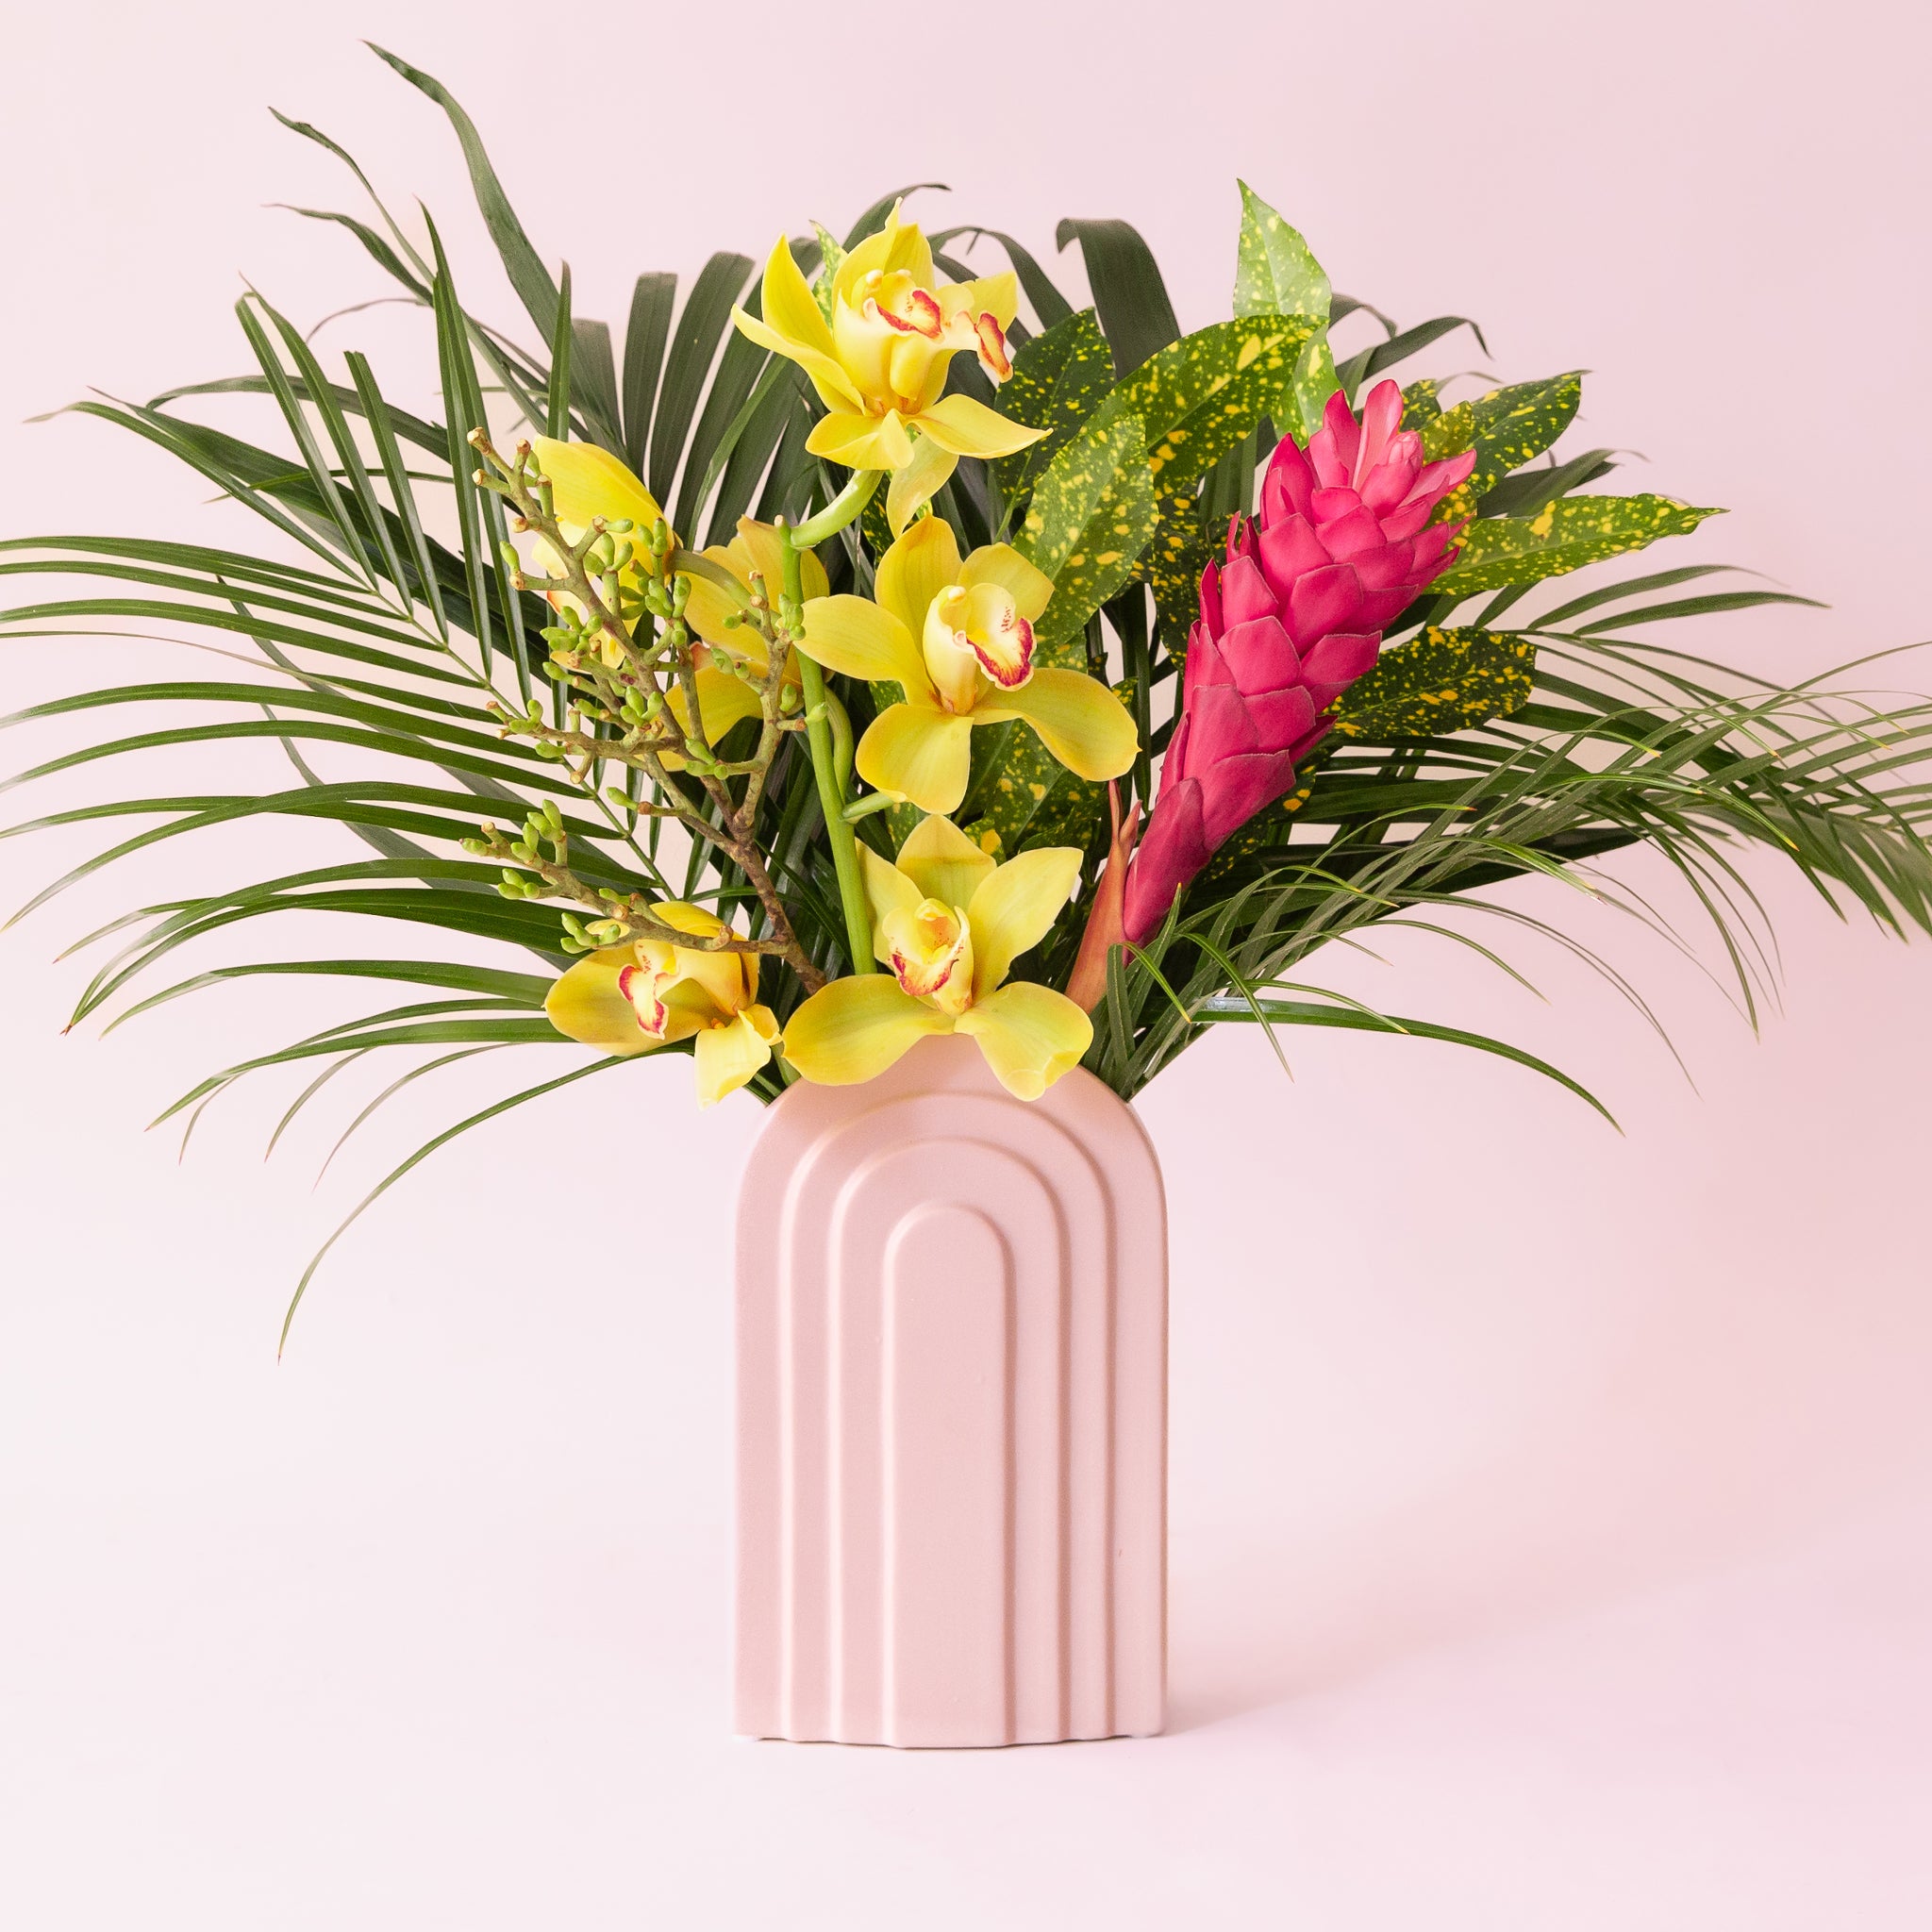 An arched ceramic vase in a cool toned pink shade.